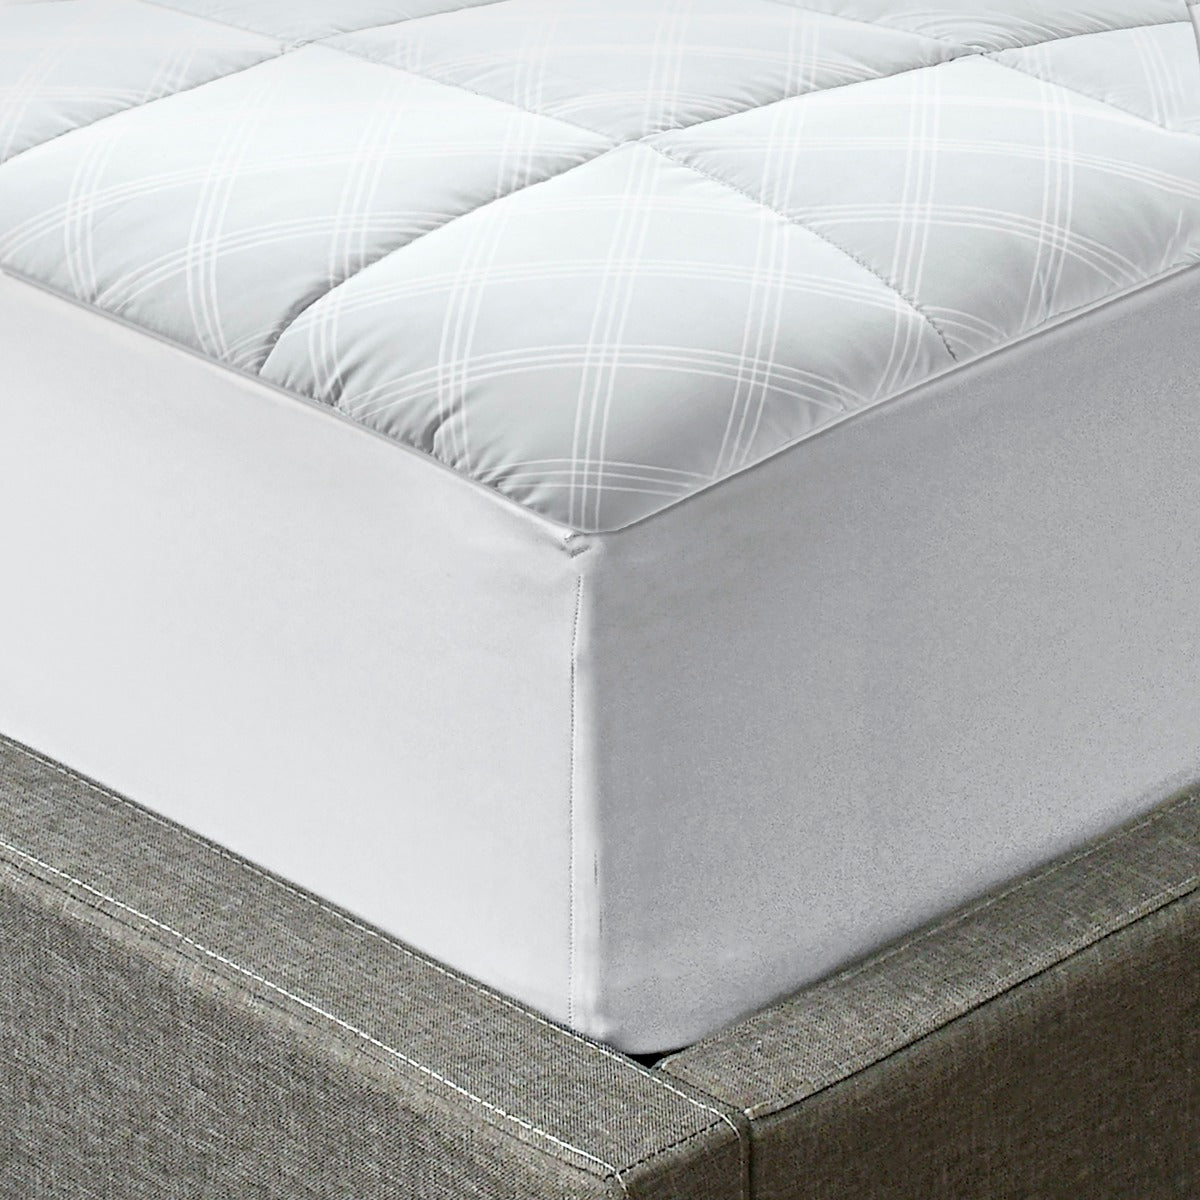 Ultimate Protection And Comfort Allergy Protection Mattress Pad